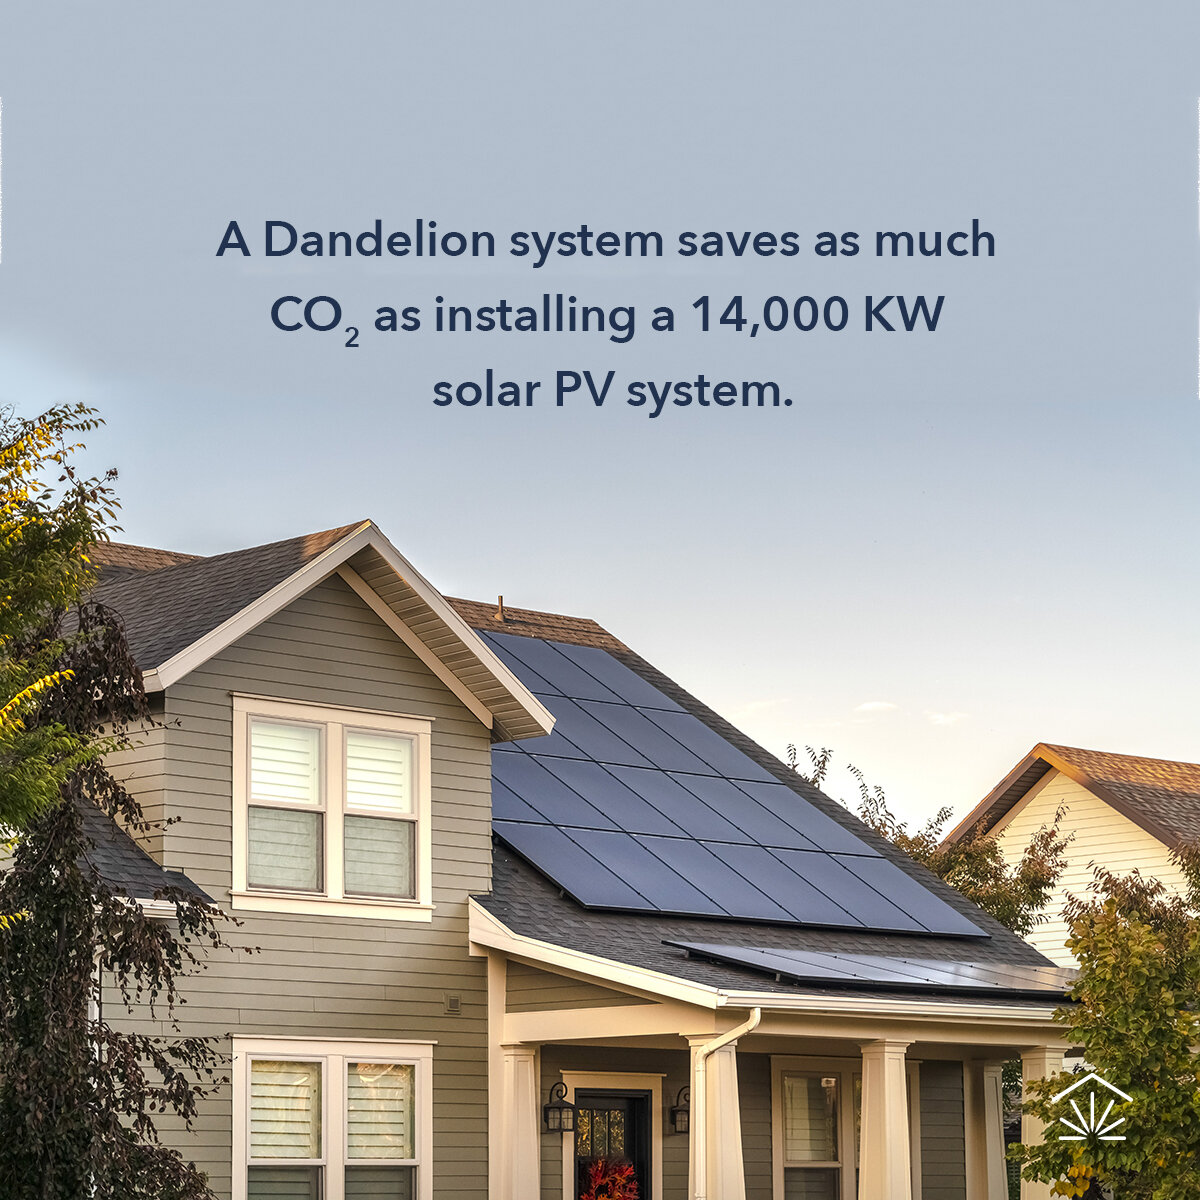 A photograph of a house with solar panels with the text 'A Dandelion system saves as much CO2 as installing a 14,000 KW solar PV system.'